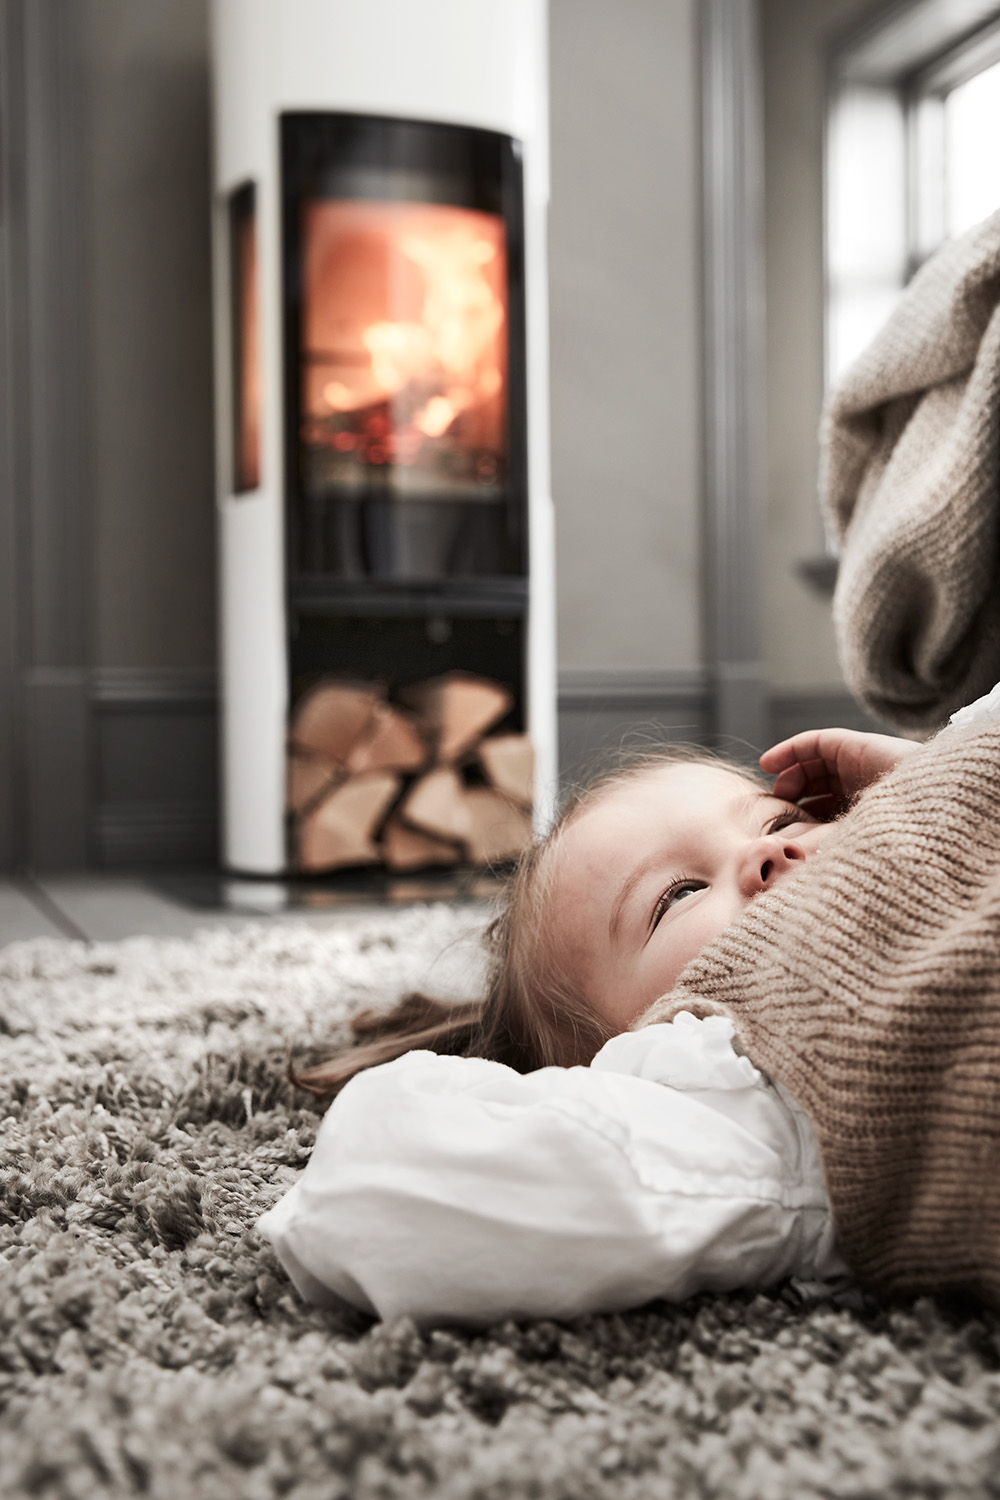 A small child laying on a rug infront of a burning wood stove